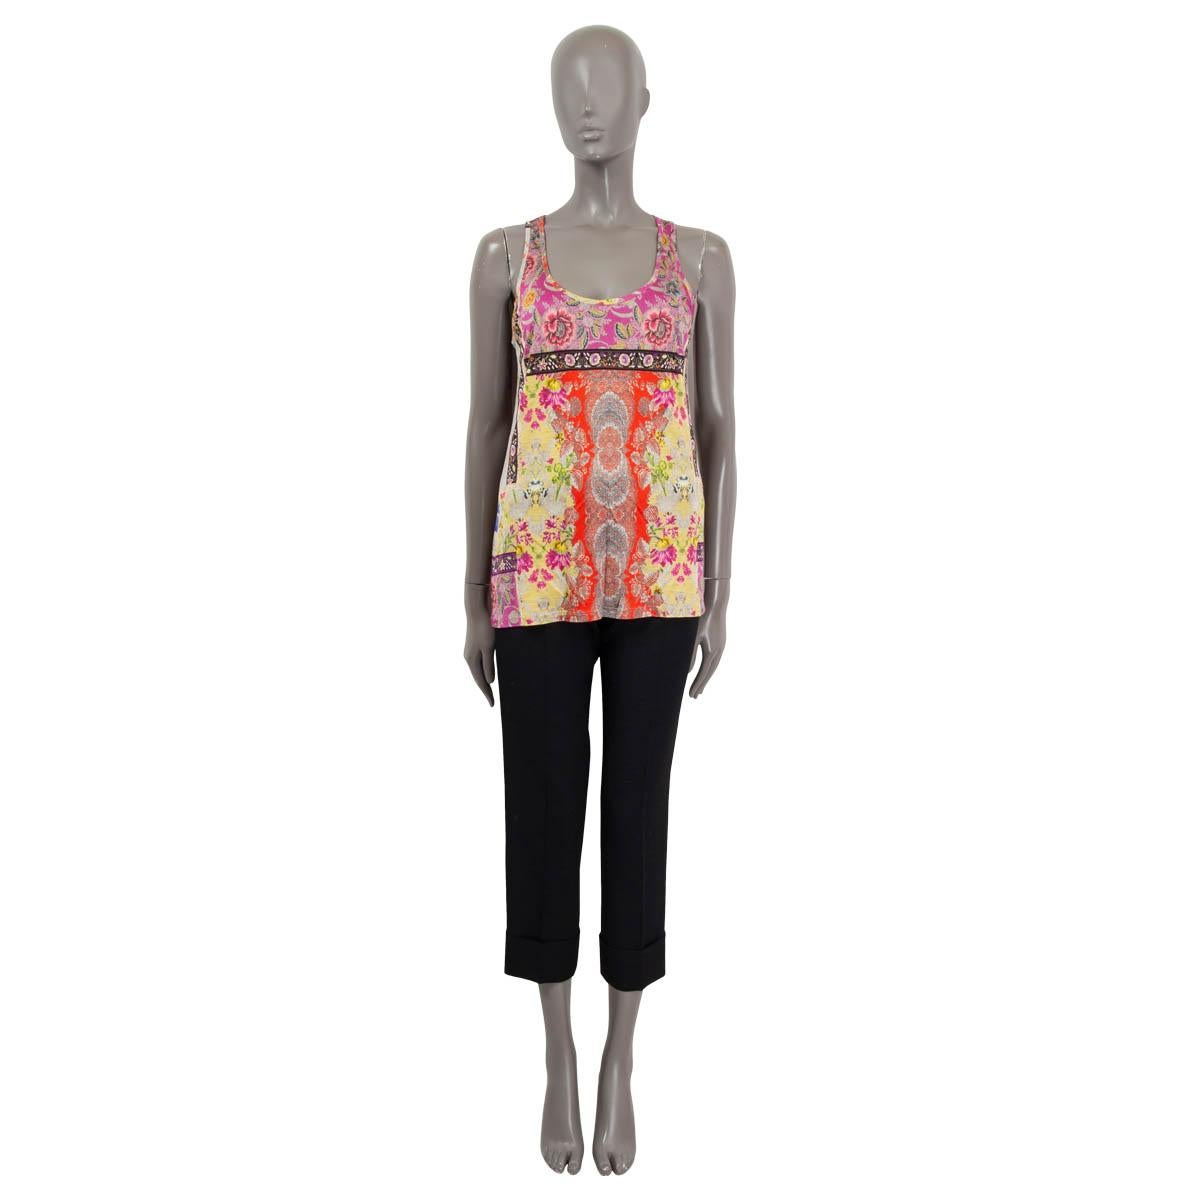 100% authentic Etro patterned tank top in multi-colored viscose (100%). Unlined. Features a round neck, straight cut and stretchy material. Has been worn and is in excellent condition. Matching straight leg pants available in separate